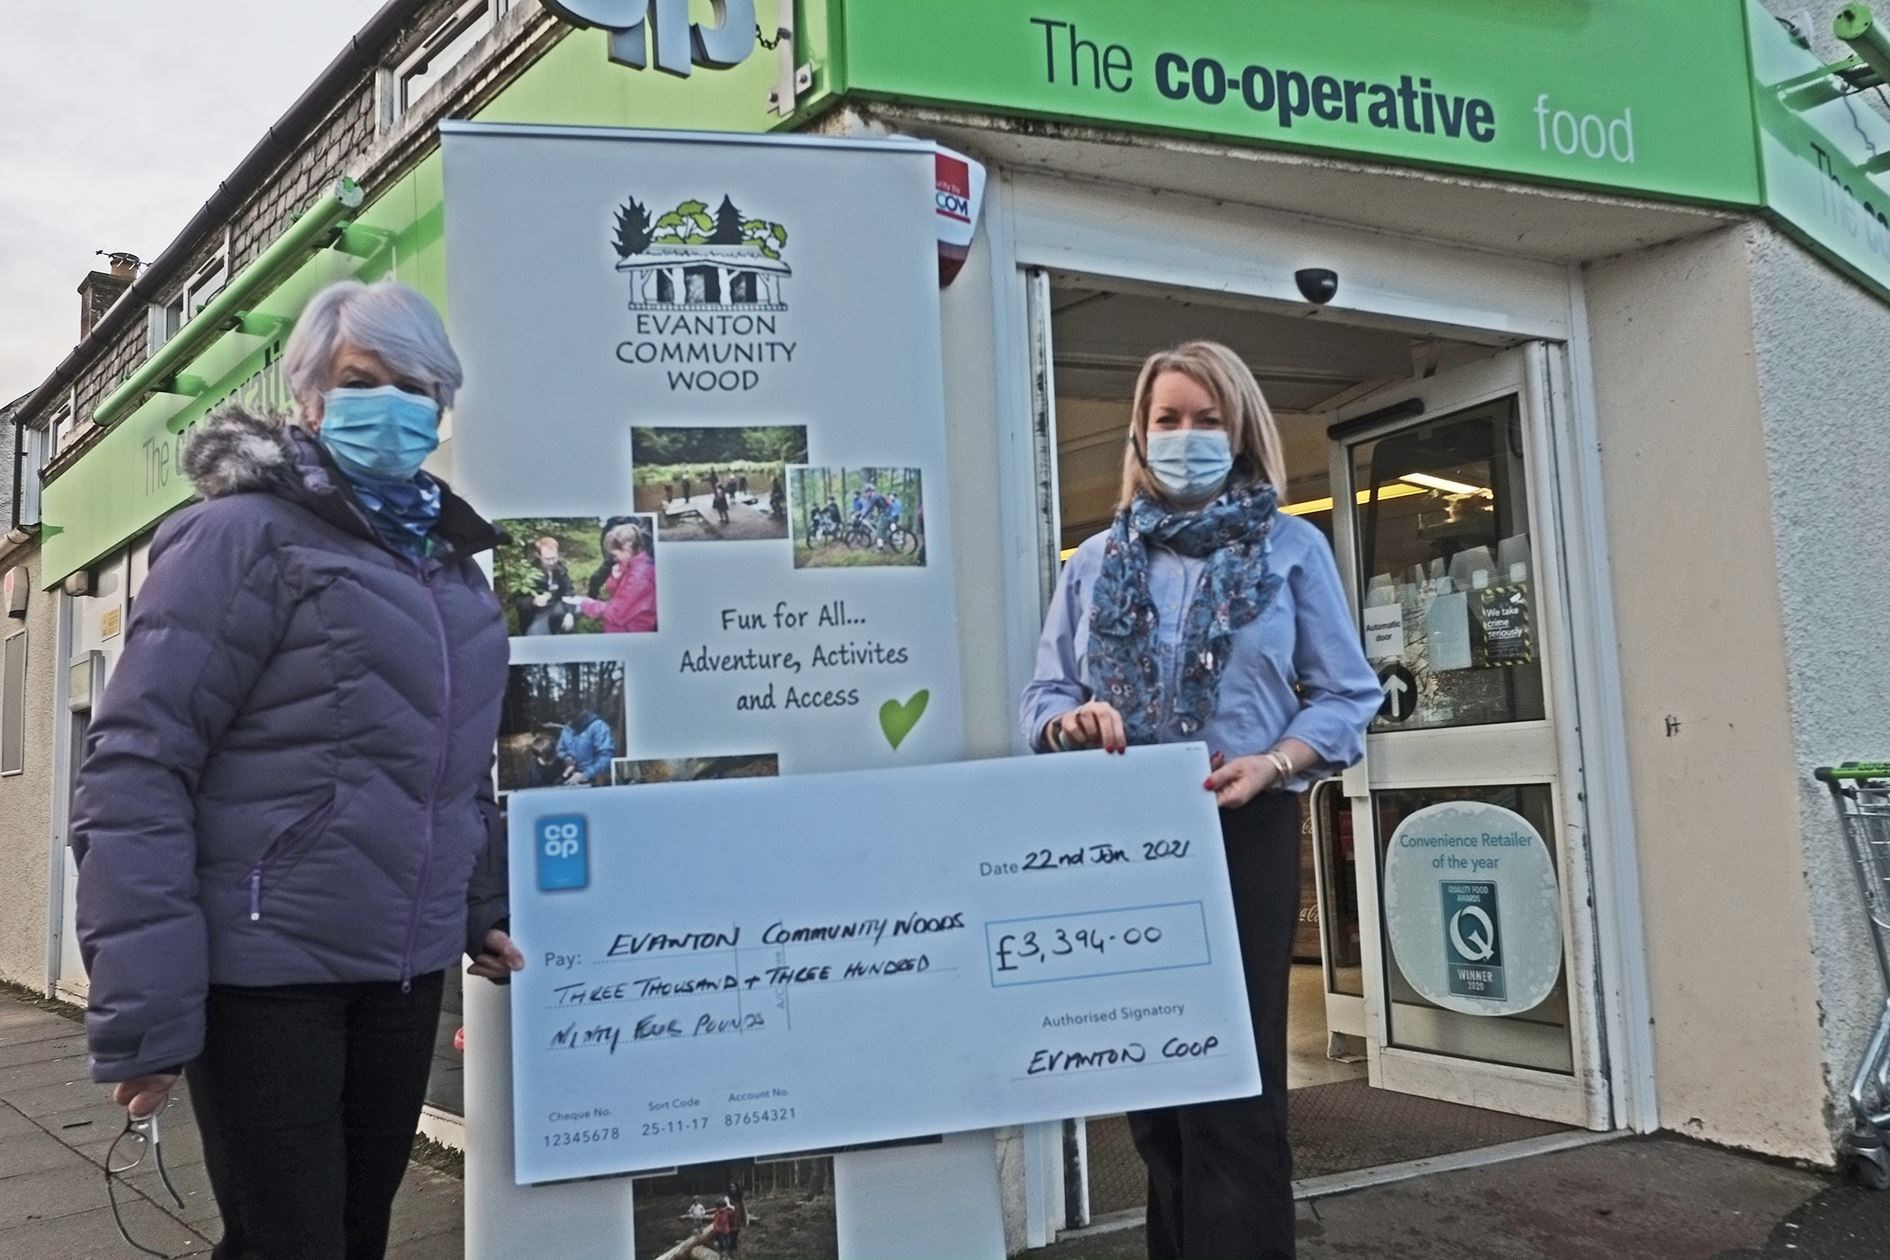 Linda Ross, Evanton Coop team leader (right) hands the cheque to Penny Gray, treasurer of the community wood.